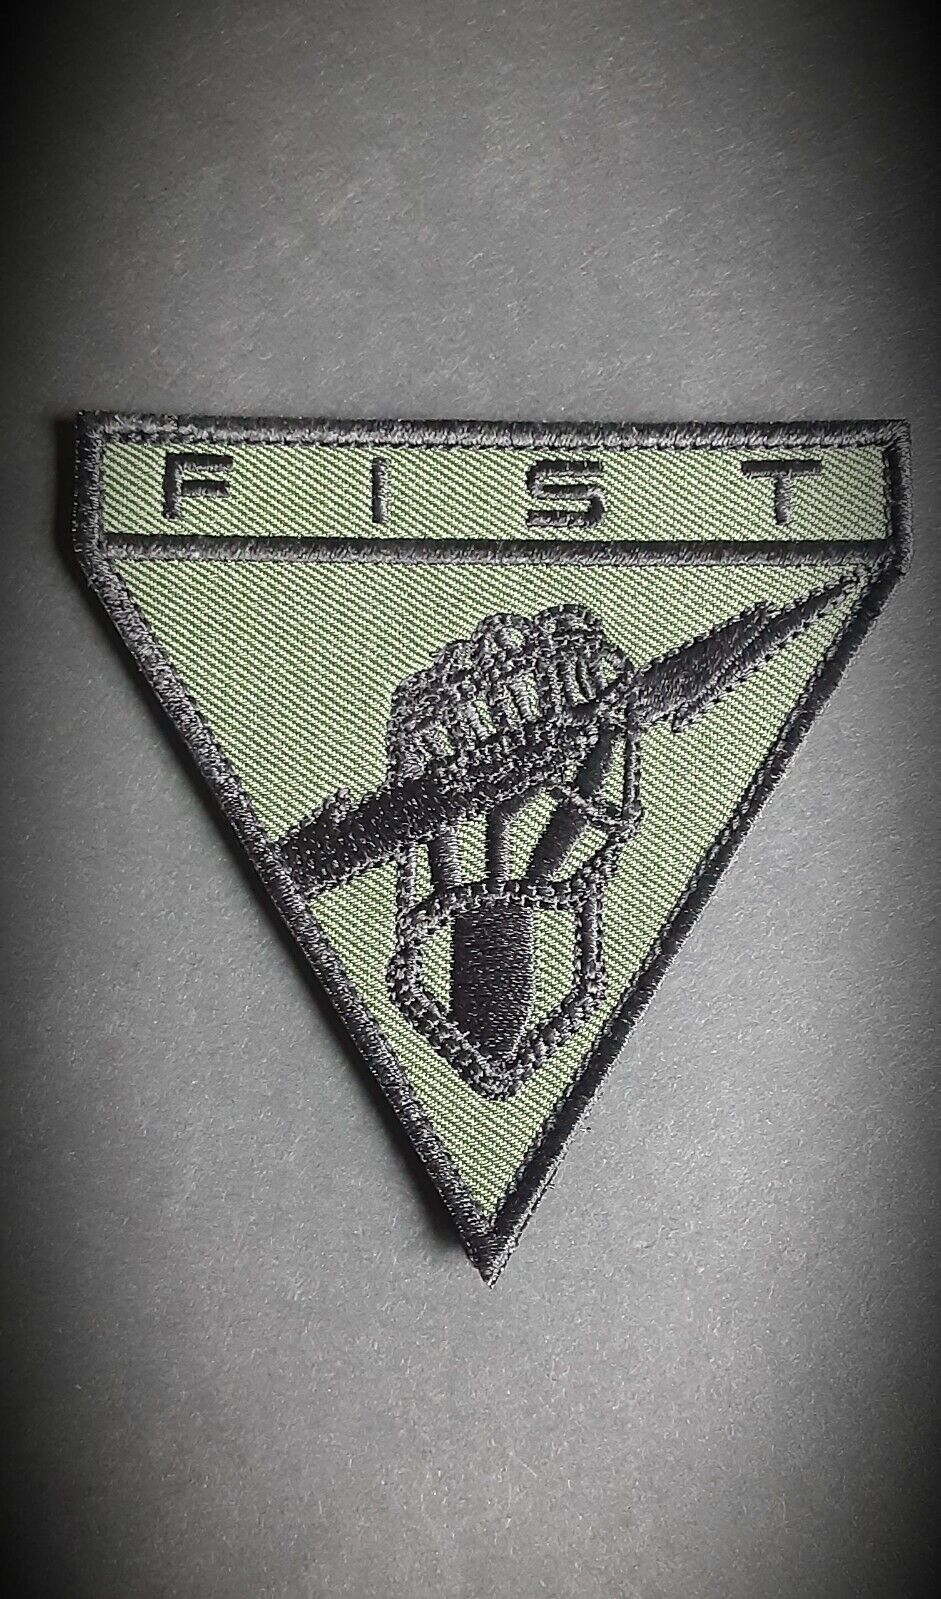 Army FIST patch forward observer fister